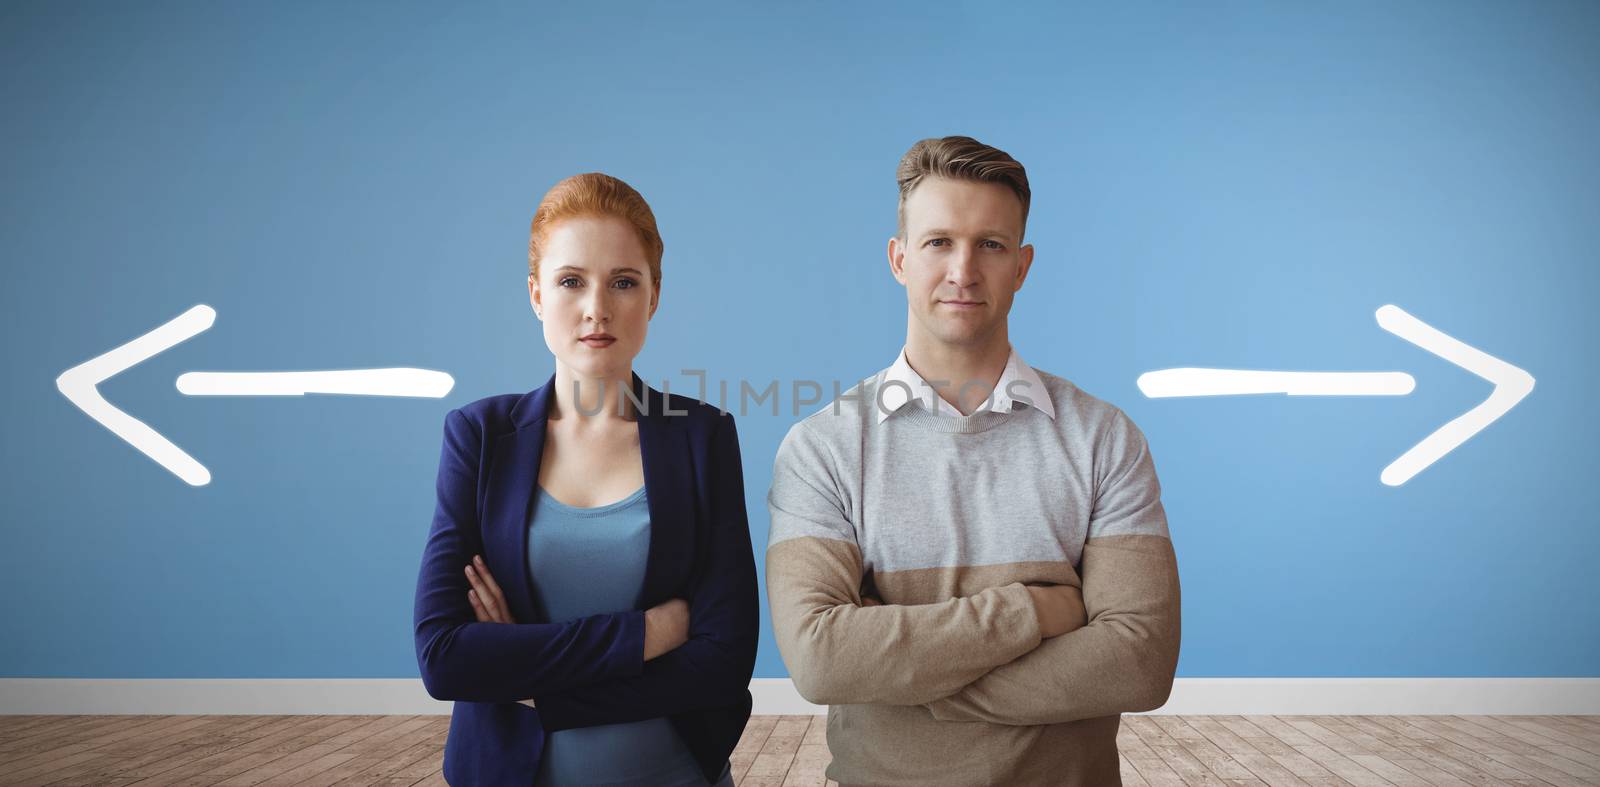 Composite image of business people looking at camera by Wavebreakmedia